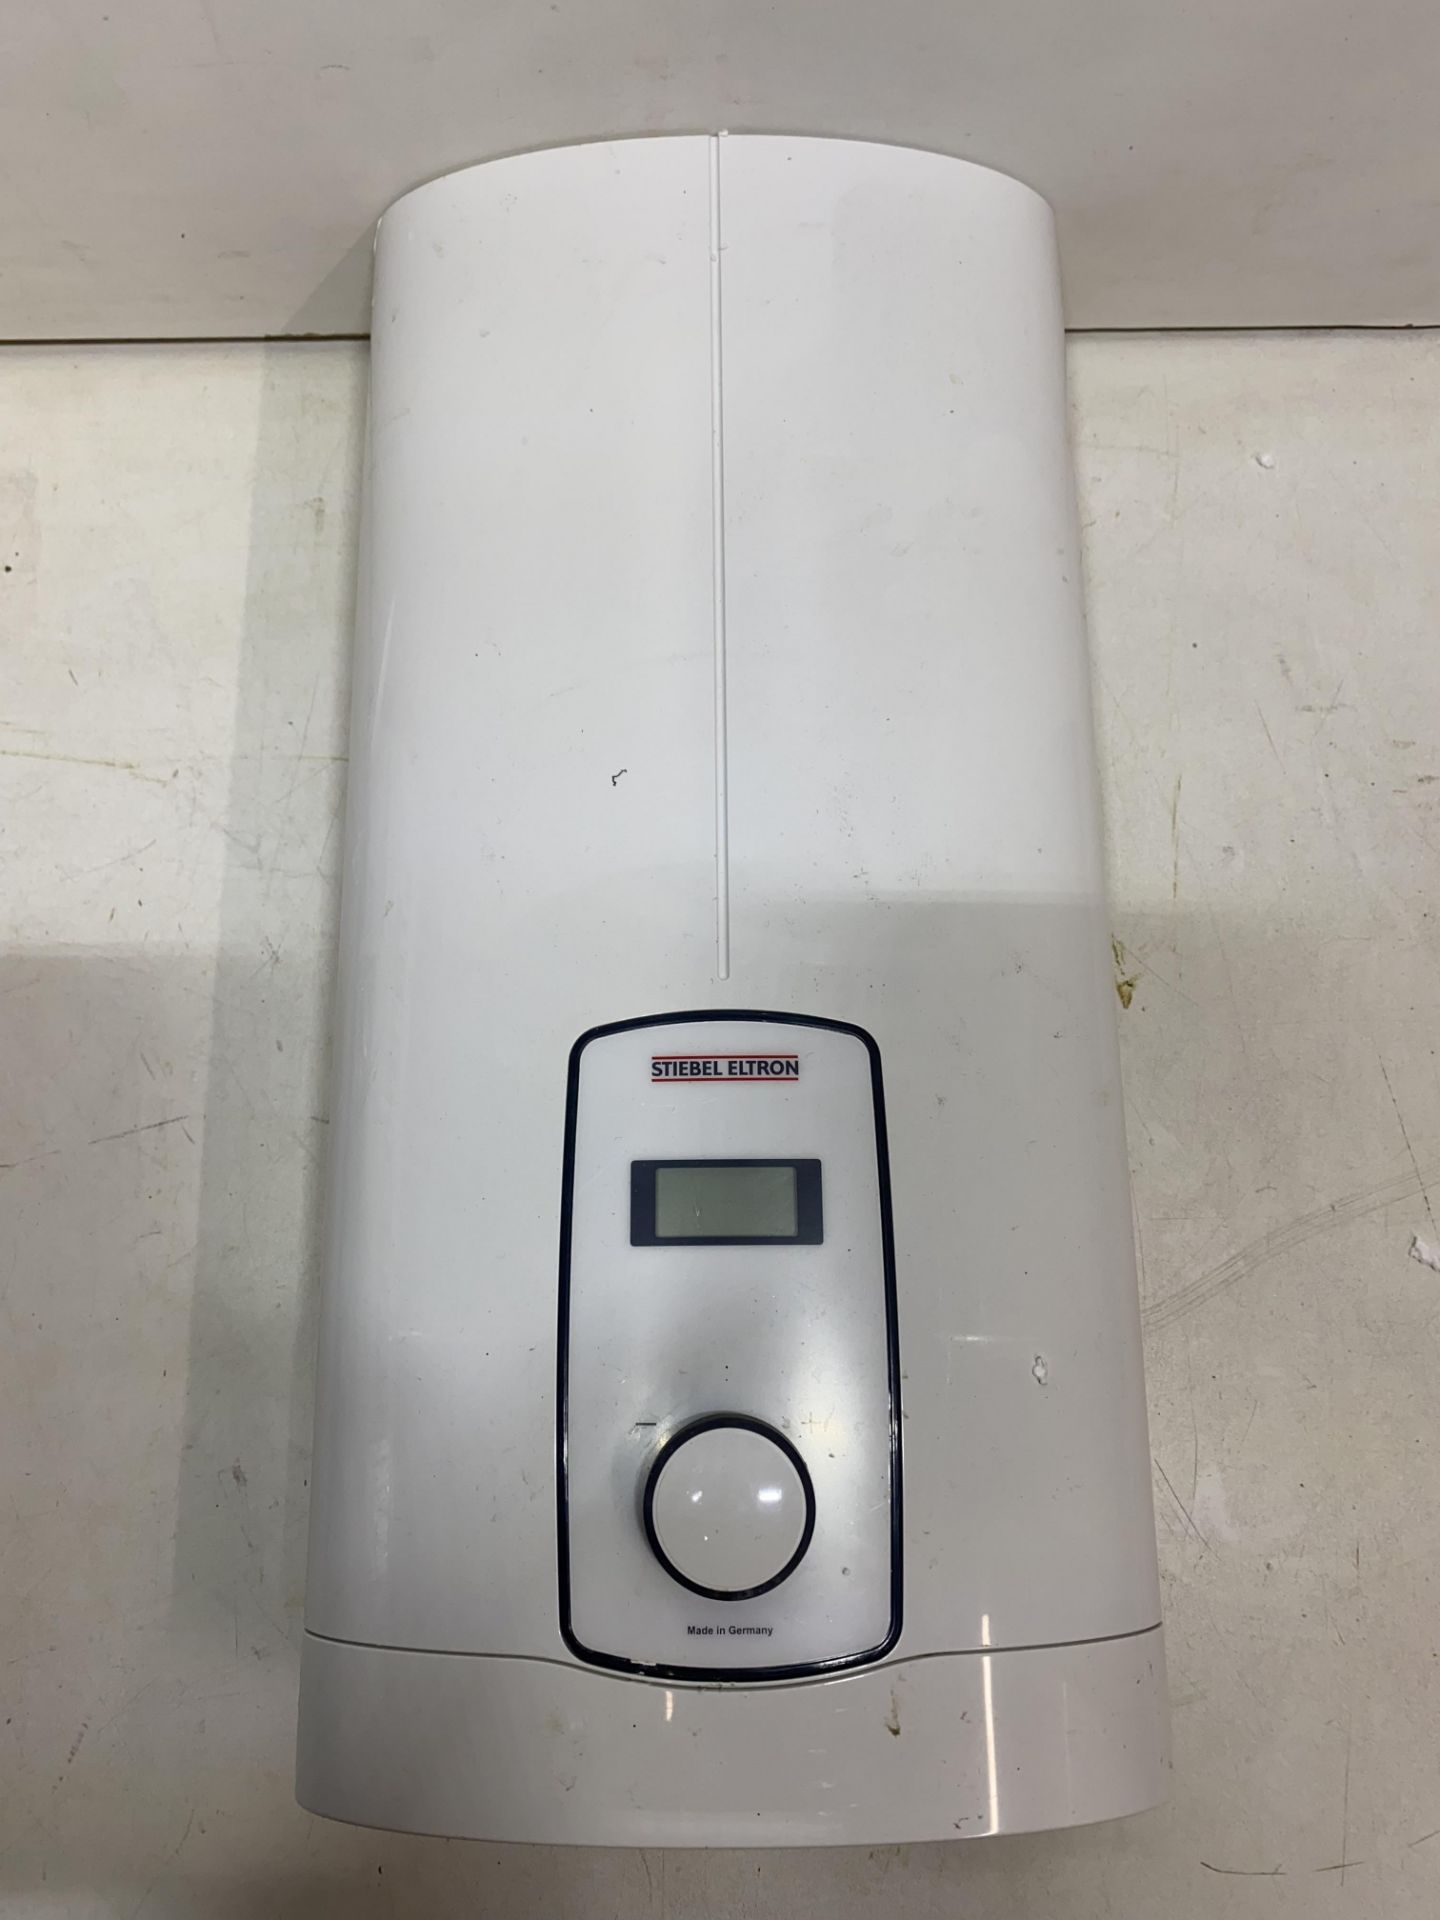 Stiebel Eltron DHB-E 18/21/24 LCD Comfort Instantaneous Water Heater - Image 2 of 7